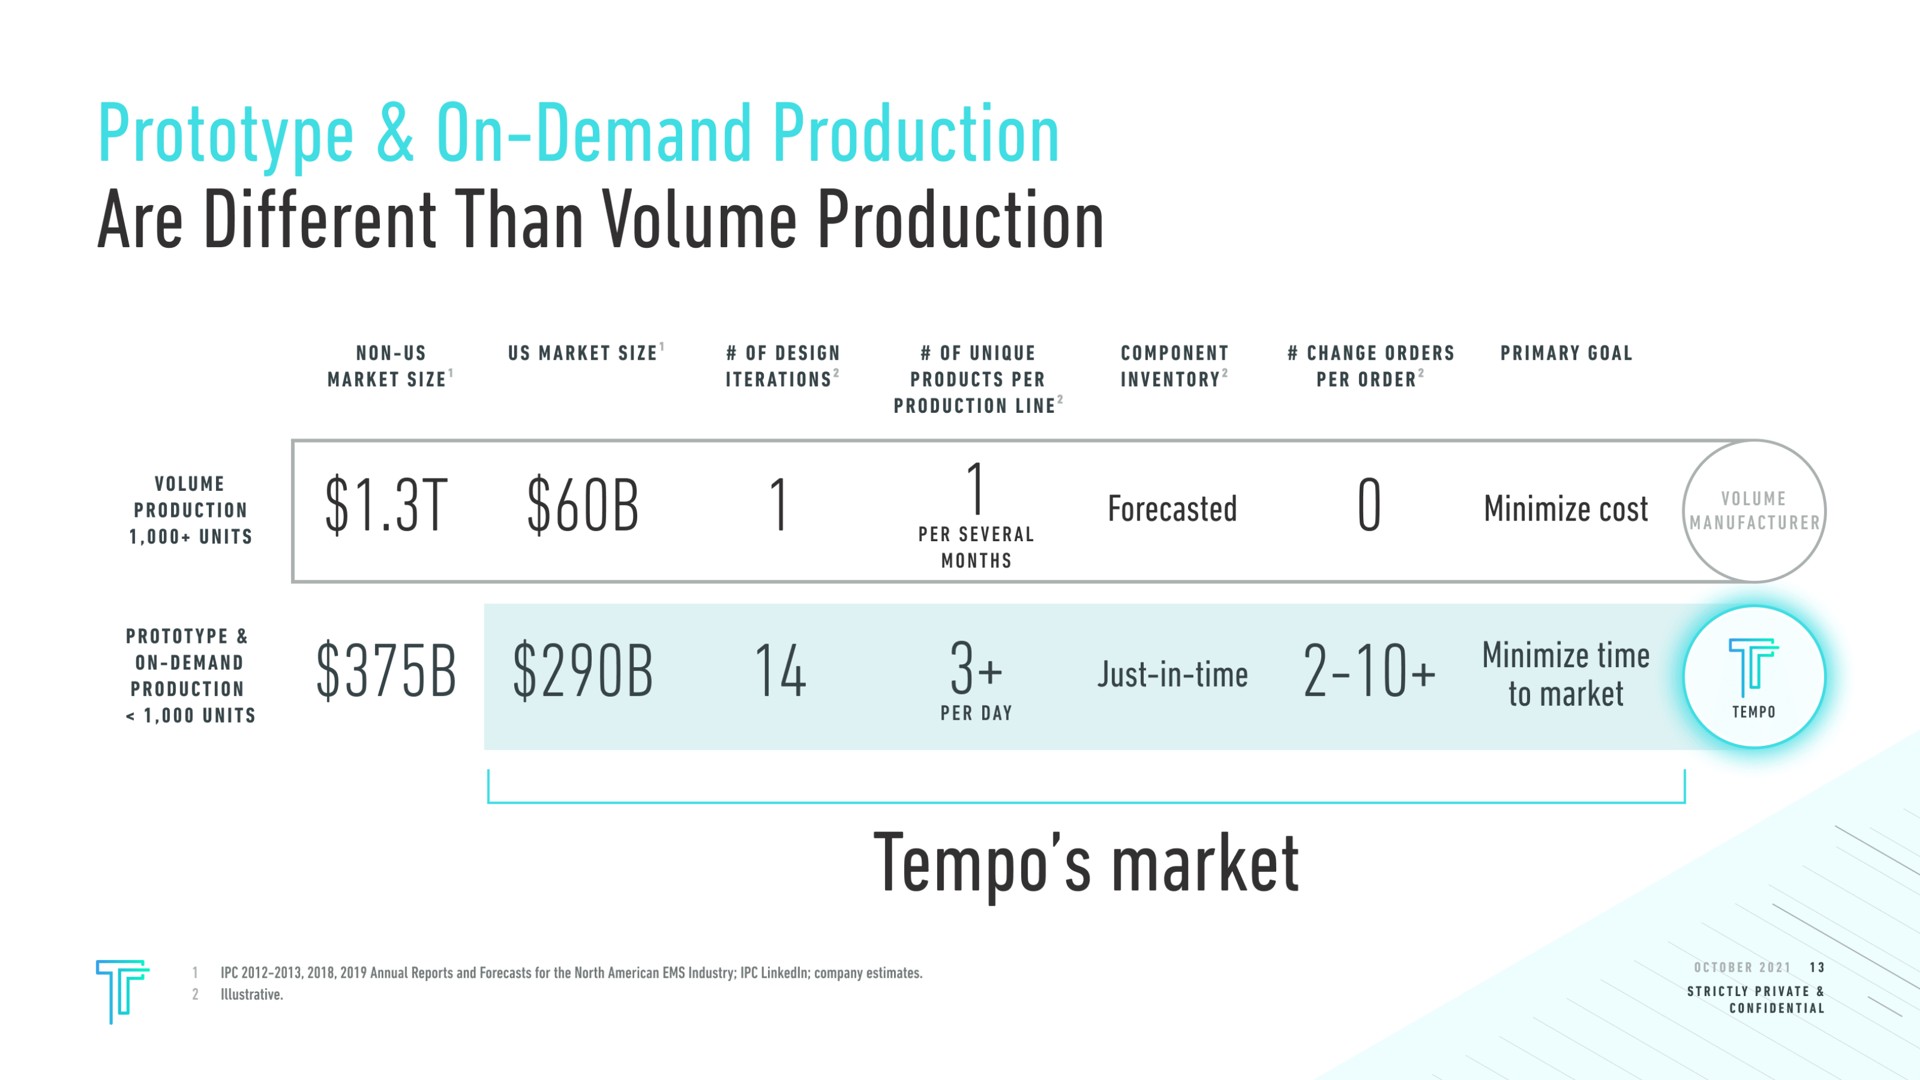 are different than volume production production vet forecasted minimize cost time minima tempo market | Tempo